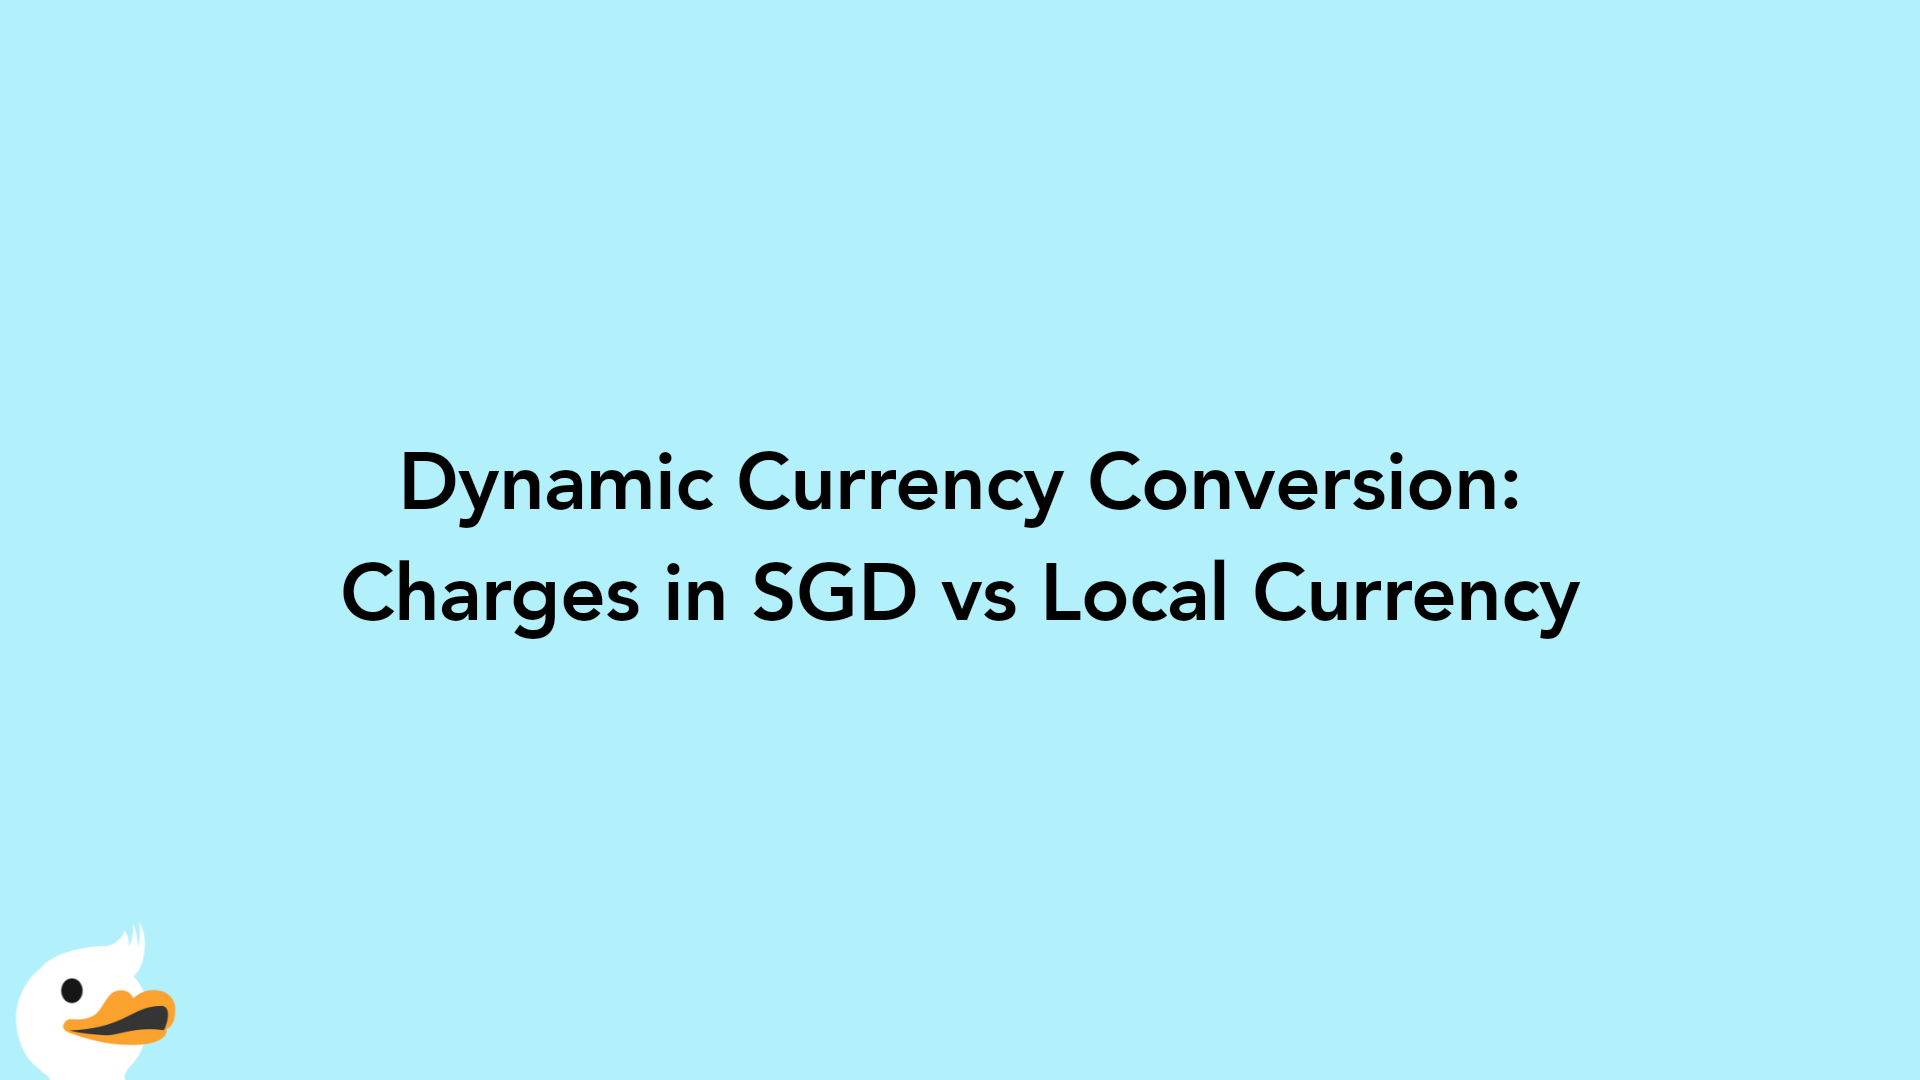 Dynamic Currency Conversion: Charges in SGD vs Local Currency